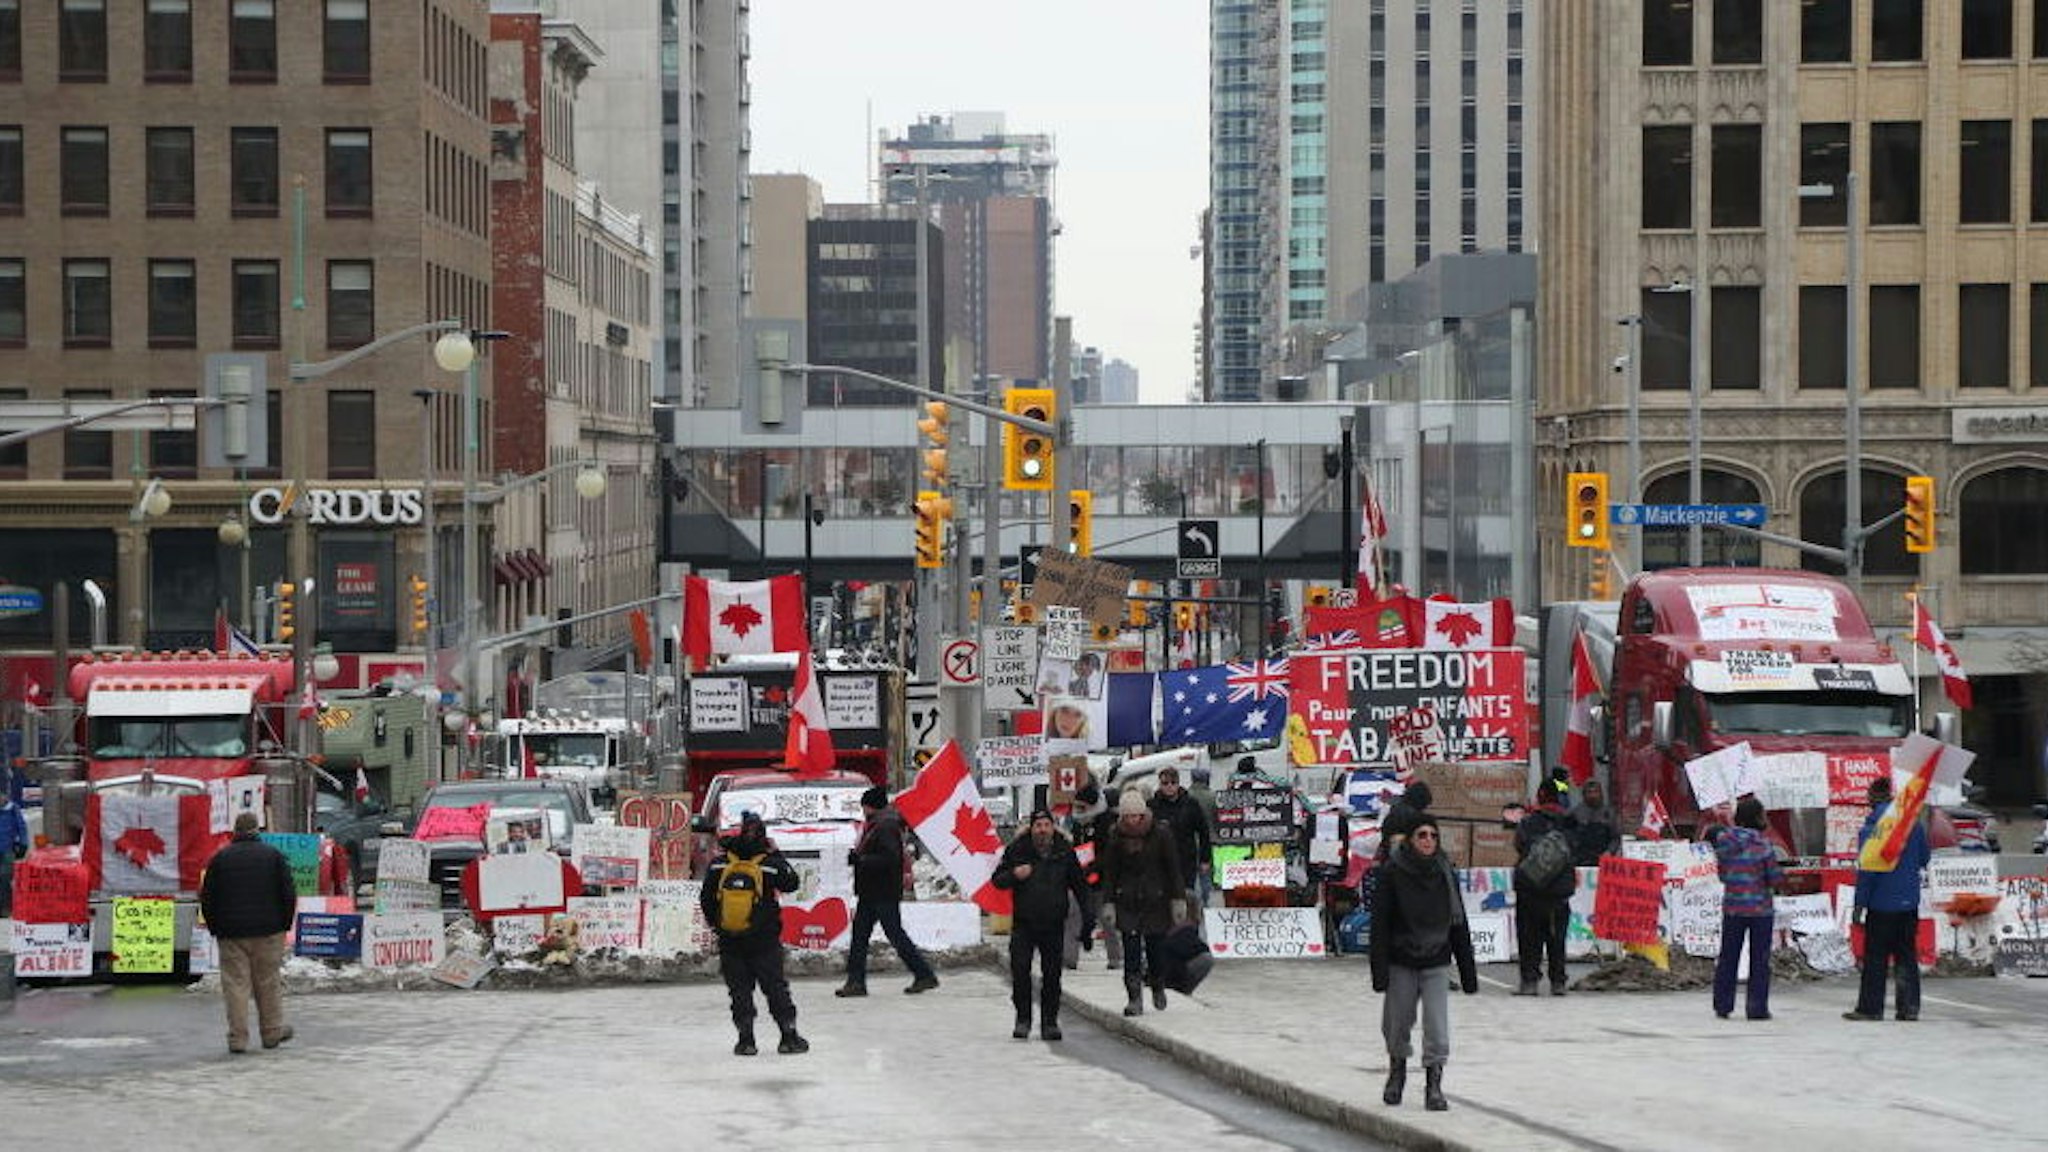 Trucks and protesters block a downtown street during a demonstration in Ottawa, Ontario, Canada, on Wednesday, Feb. 16, 2022. Demonstrations around Ottawa's parliamentary precinct are now prohibited by Prime Minister Trudeau's order, which also instructs banks to cut off funding and services to anyone who is either participating in the blockade or providing support to it. Photographer: